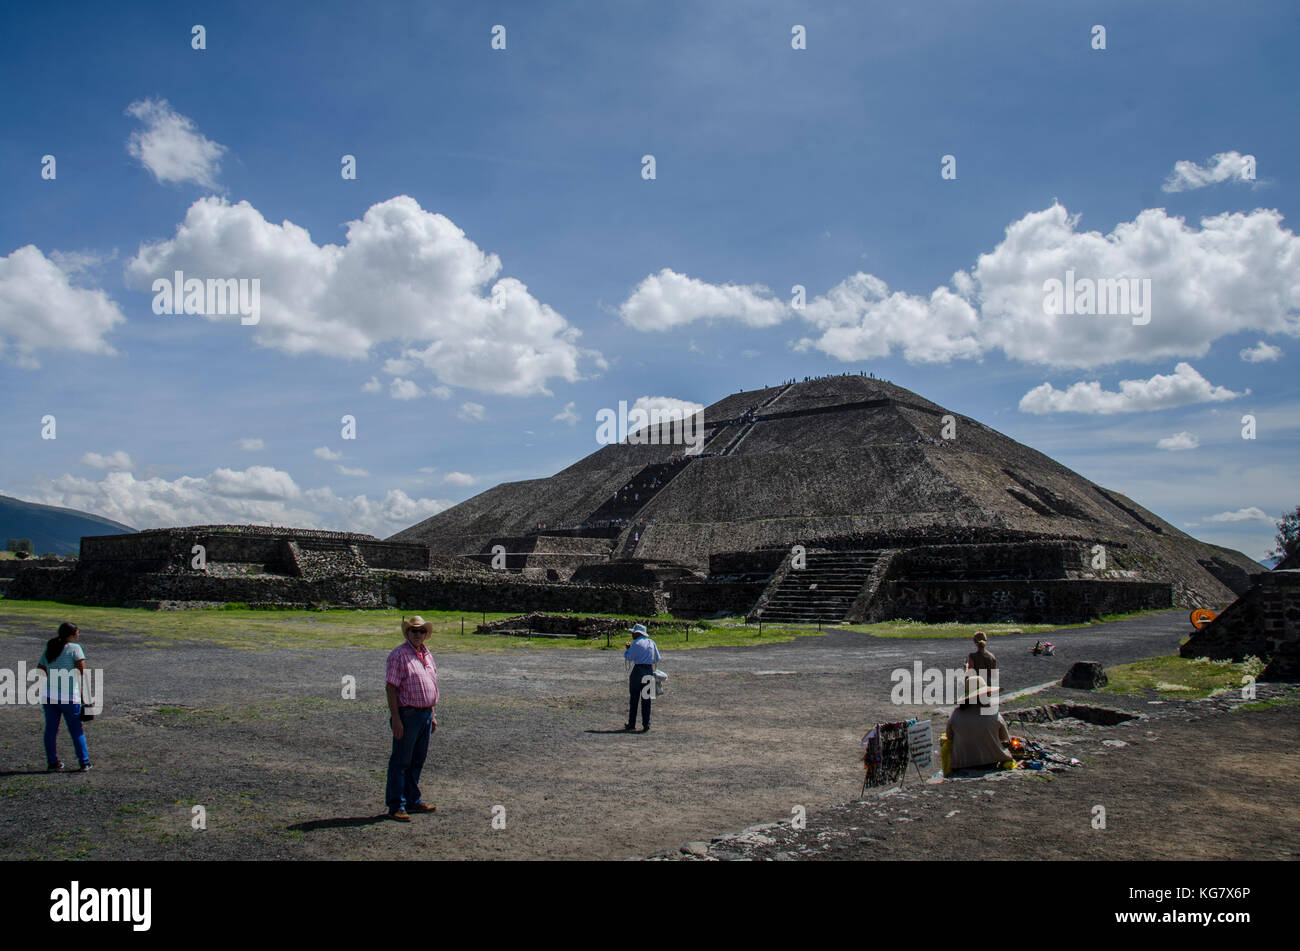 View of the Pyramid of the Sun in Teotihuacan, Mexico. Credit: Karal Pérez / Alamy Stock Photo